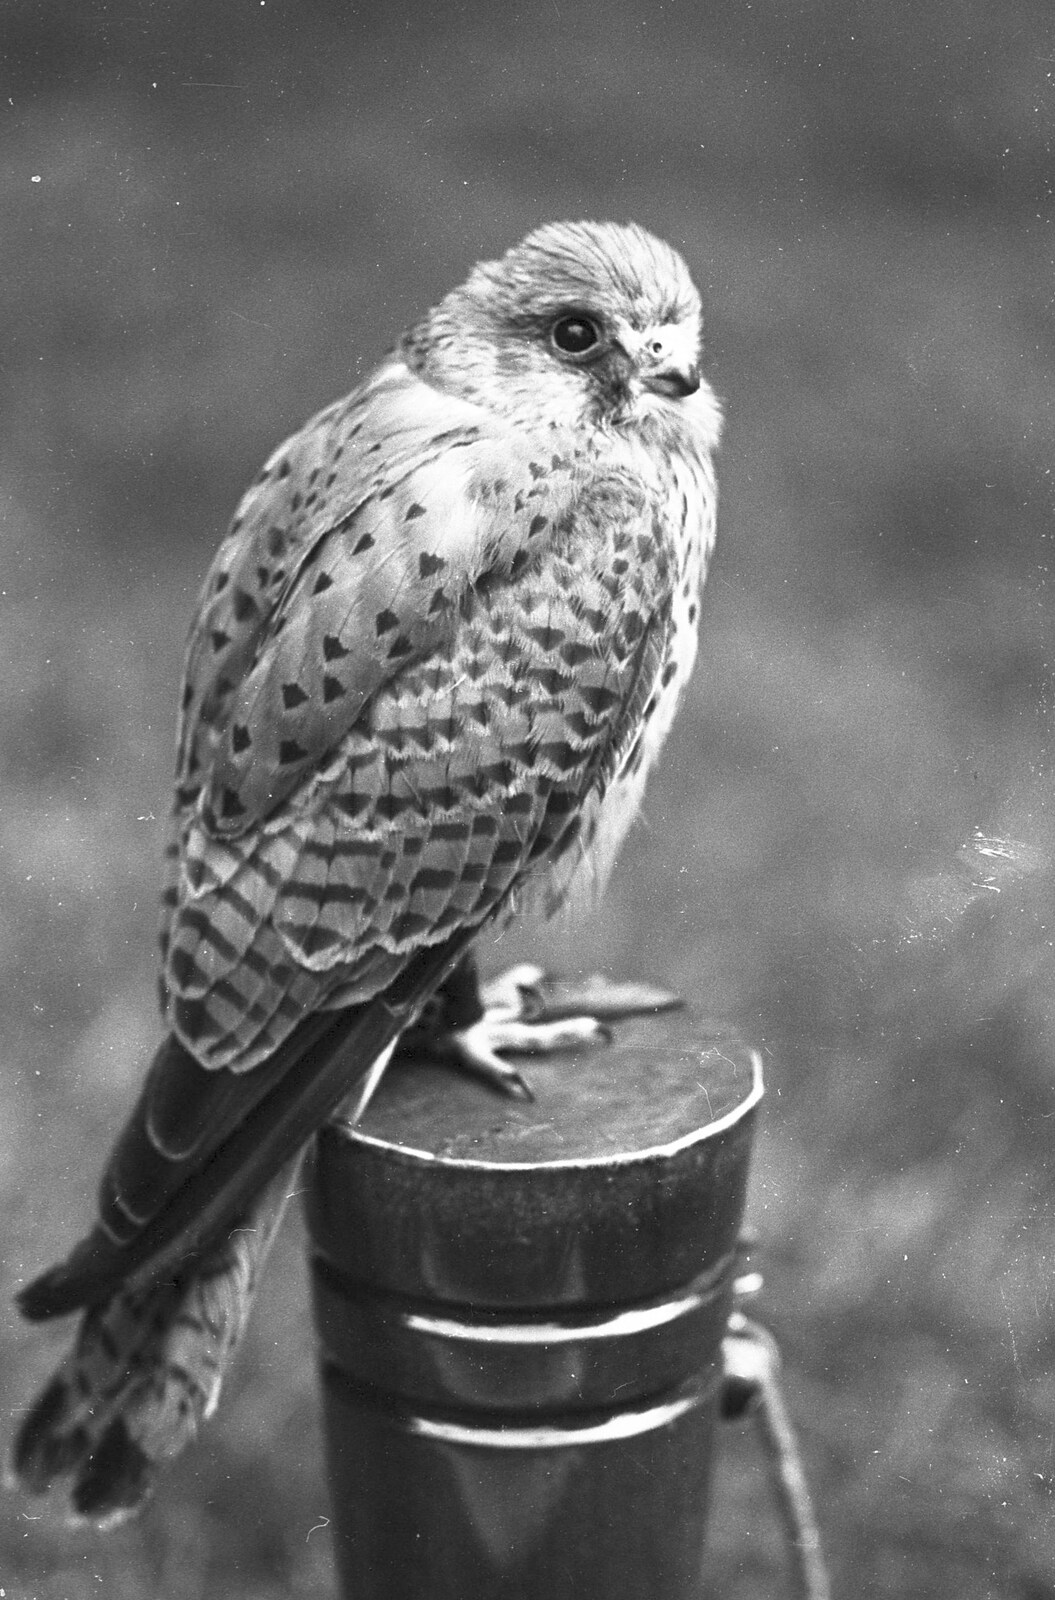 The Royal Norfolk Show, Costessey, Norwich - June 20th 1994: A kestrel